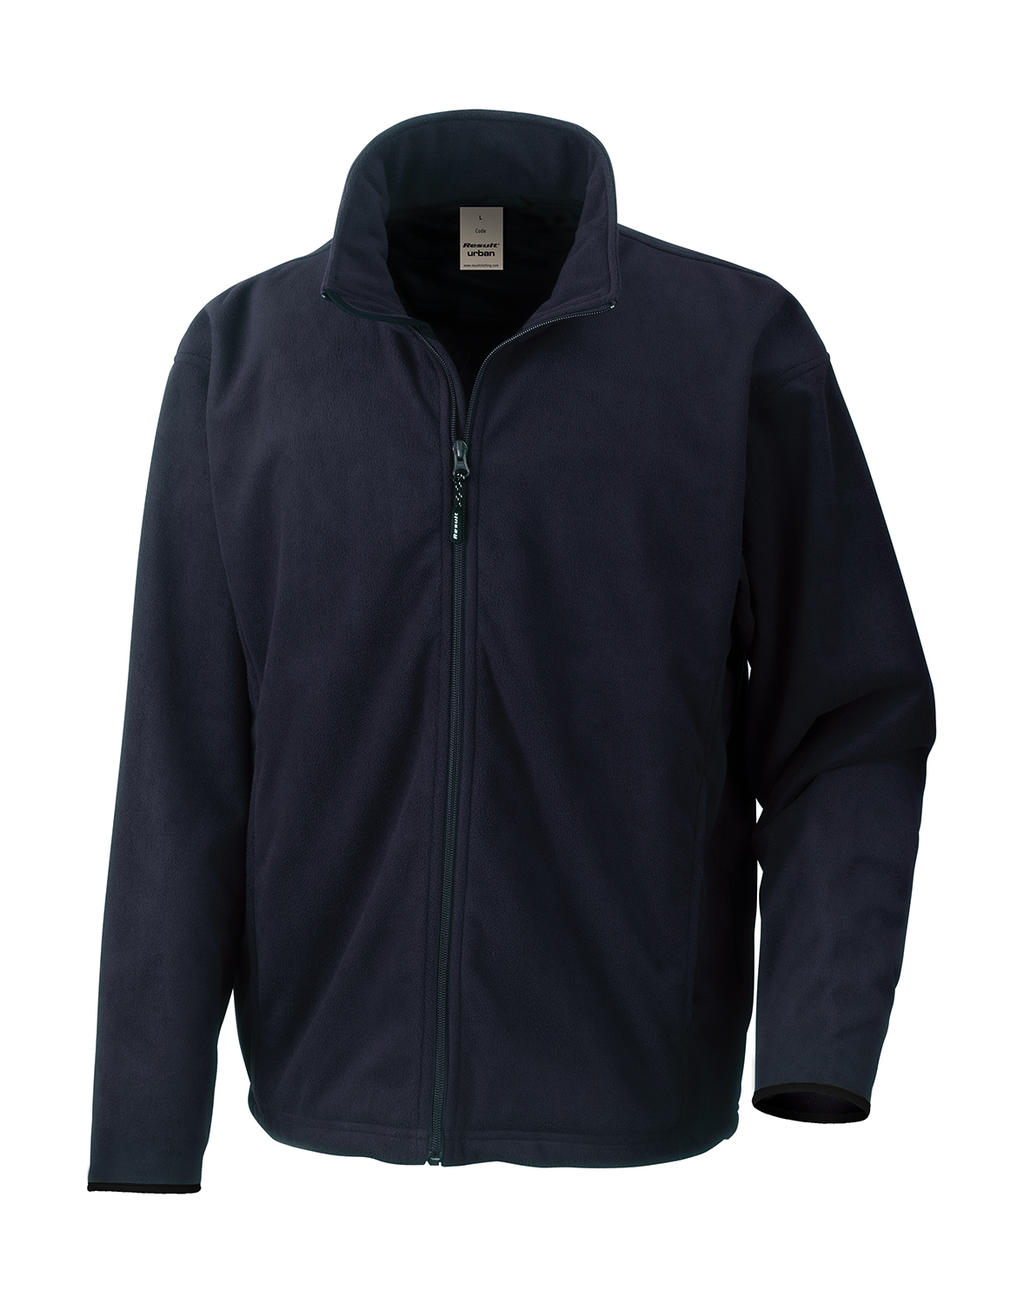 Fleece Climate Stopper Water Resistant - navy